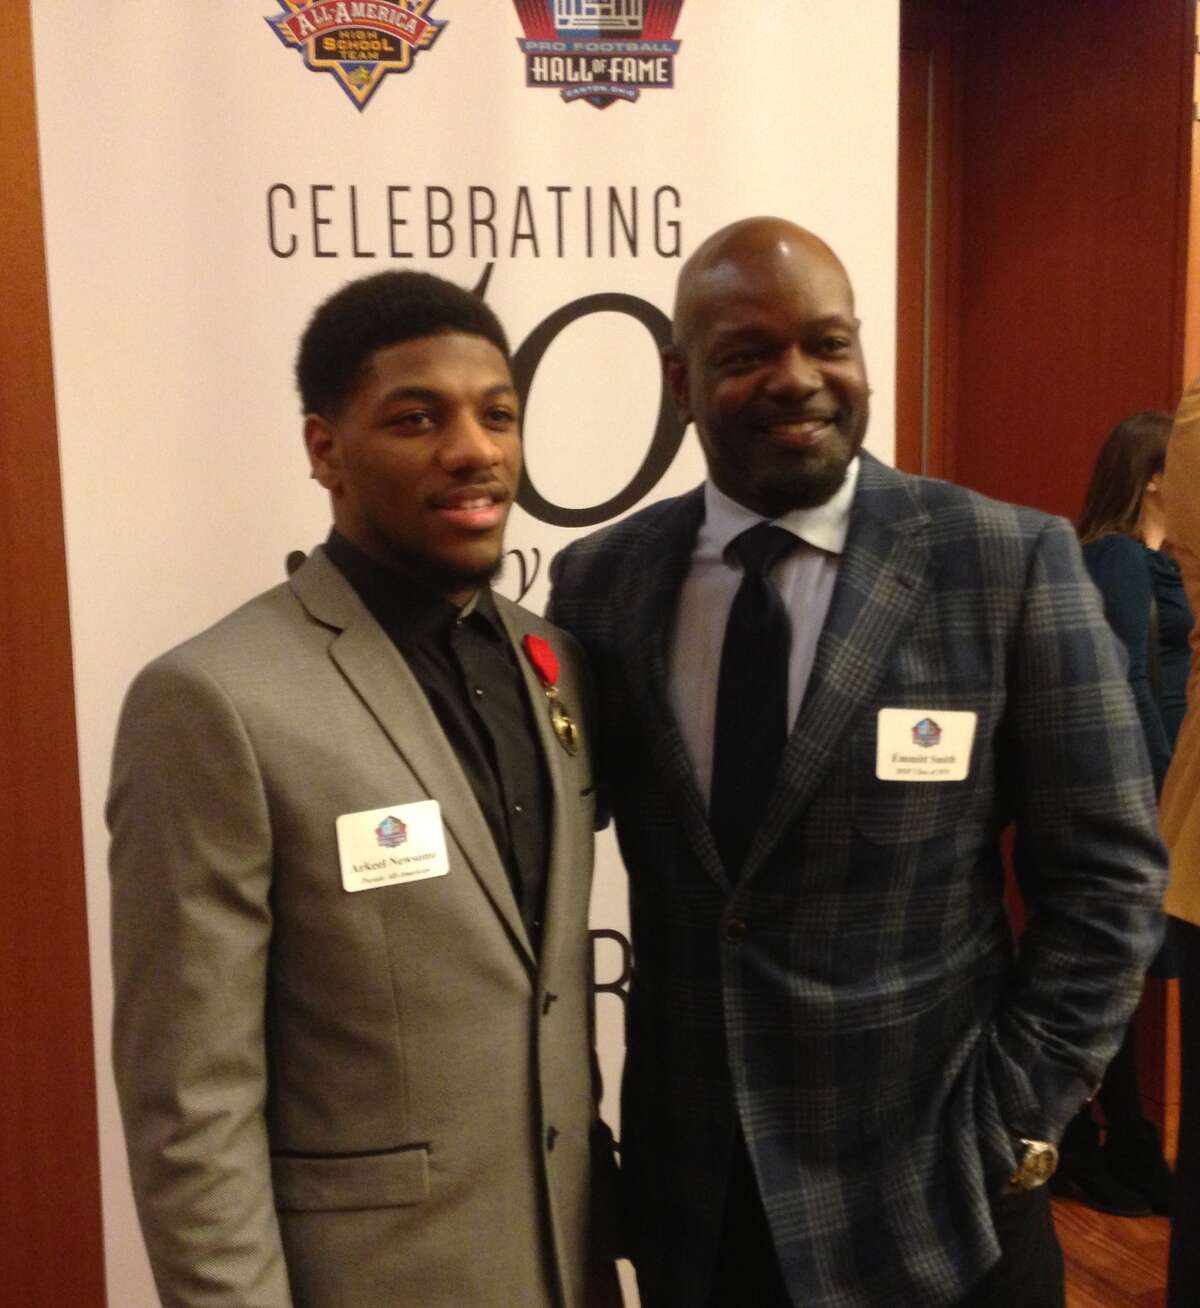 Ansonia’s Arkeel Newsome with Pro Football Hall of Famer Emmett Smith at the Hall of Fame Luncheon New York. Newsome was honored with Will Grier and Jabrill Peppers for their selection to the Parade All-American team. (Photo: Tom Brockett)